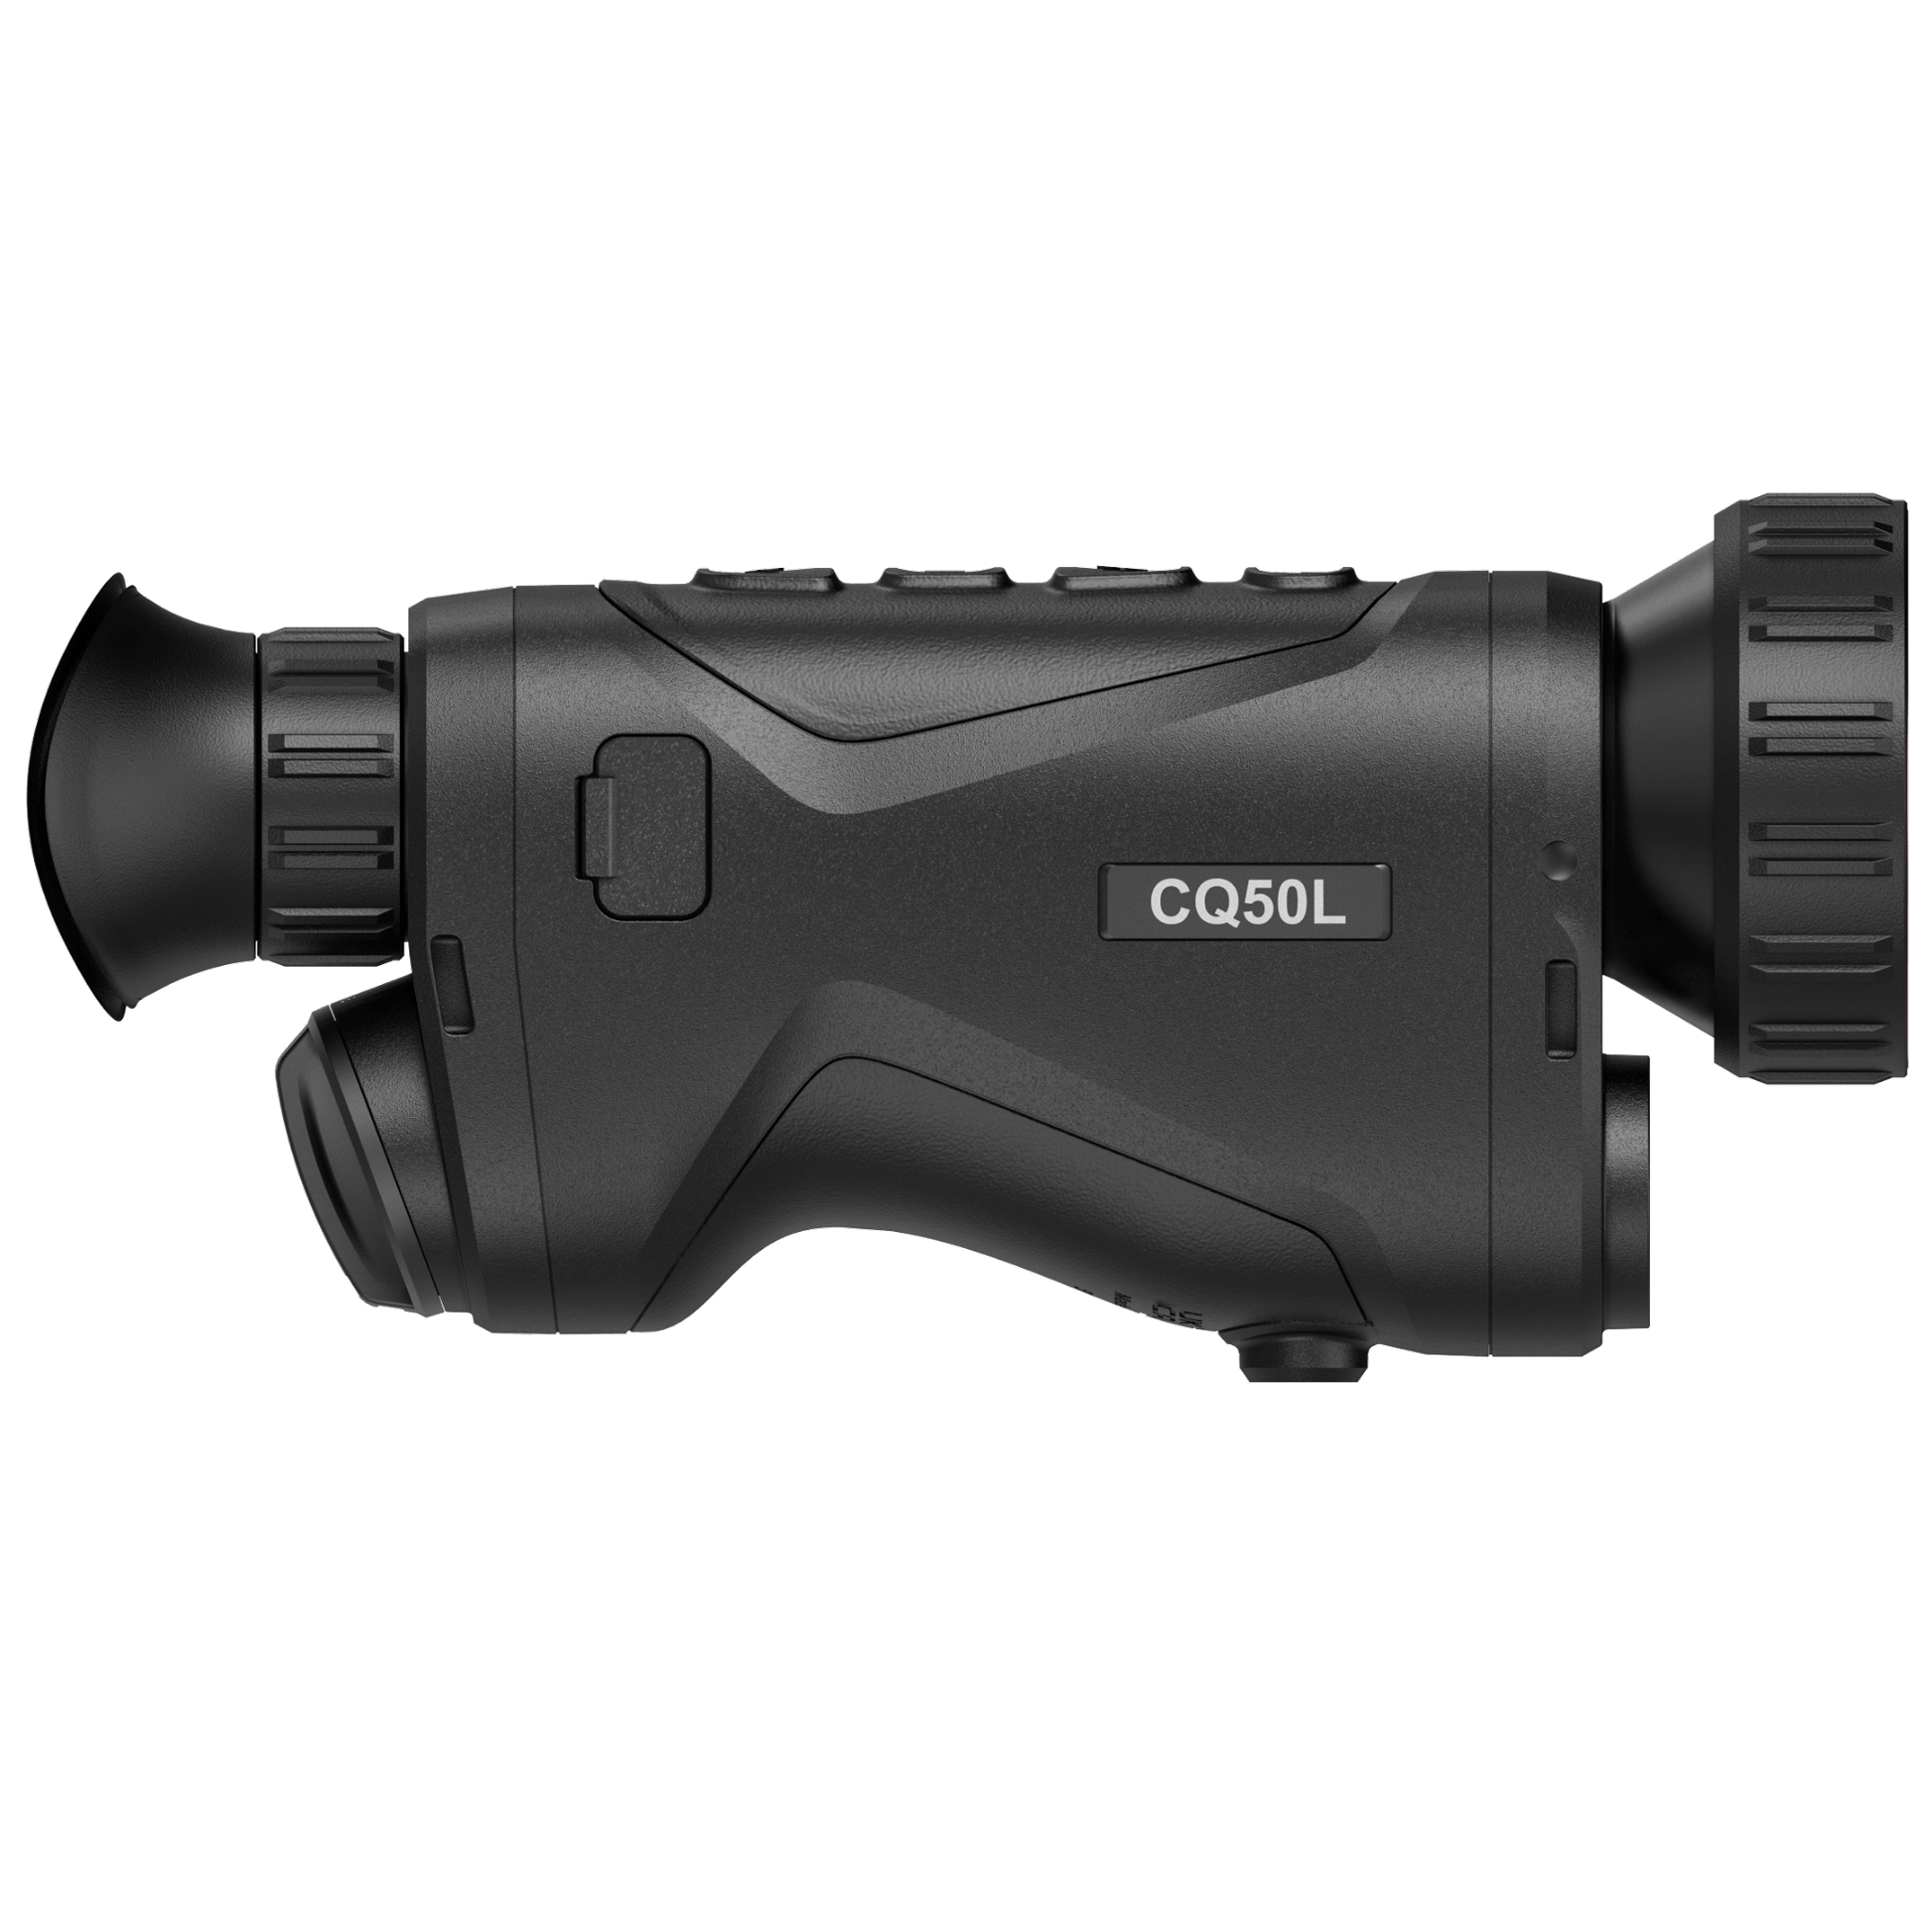 Side view of the HikMicro Condor CQ50L thermal monocular, highlighting its sleek design and CQ50L branding. A leading choice for both hunting and security/surveillance, this device boasts an integrated rangefinder for precision and clarity.